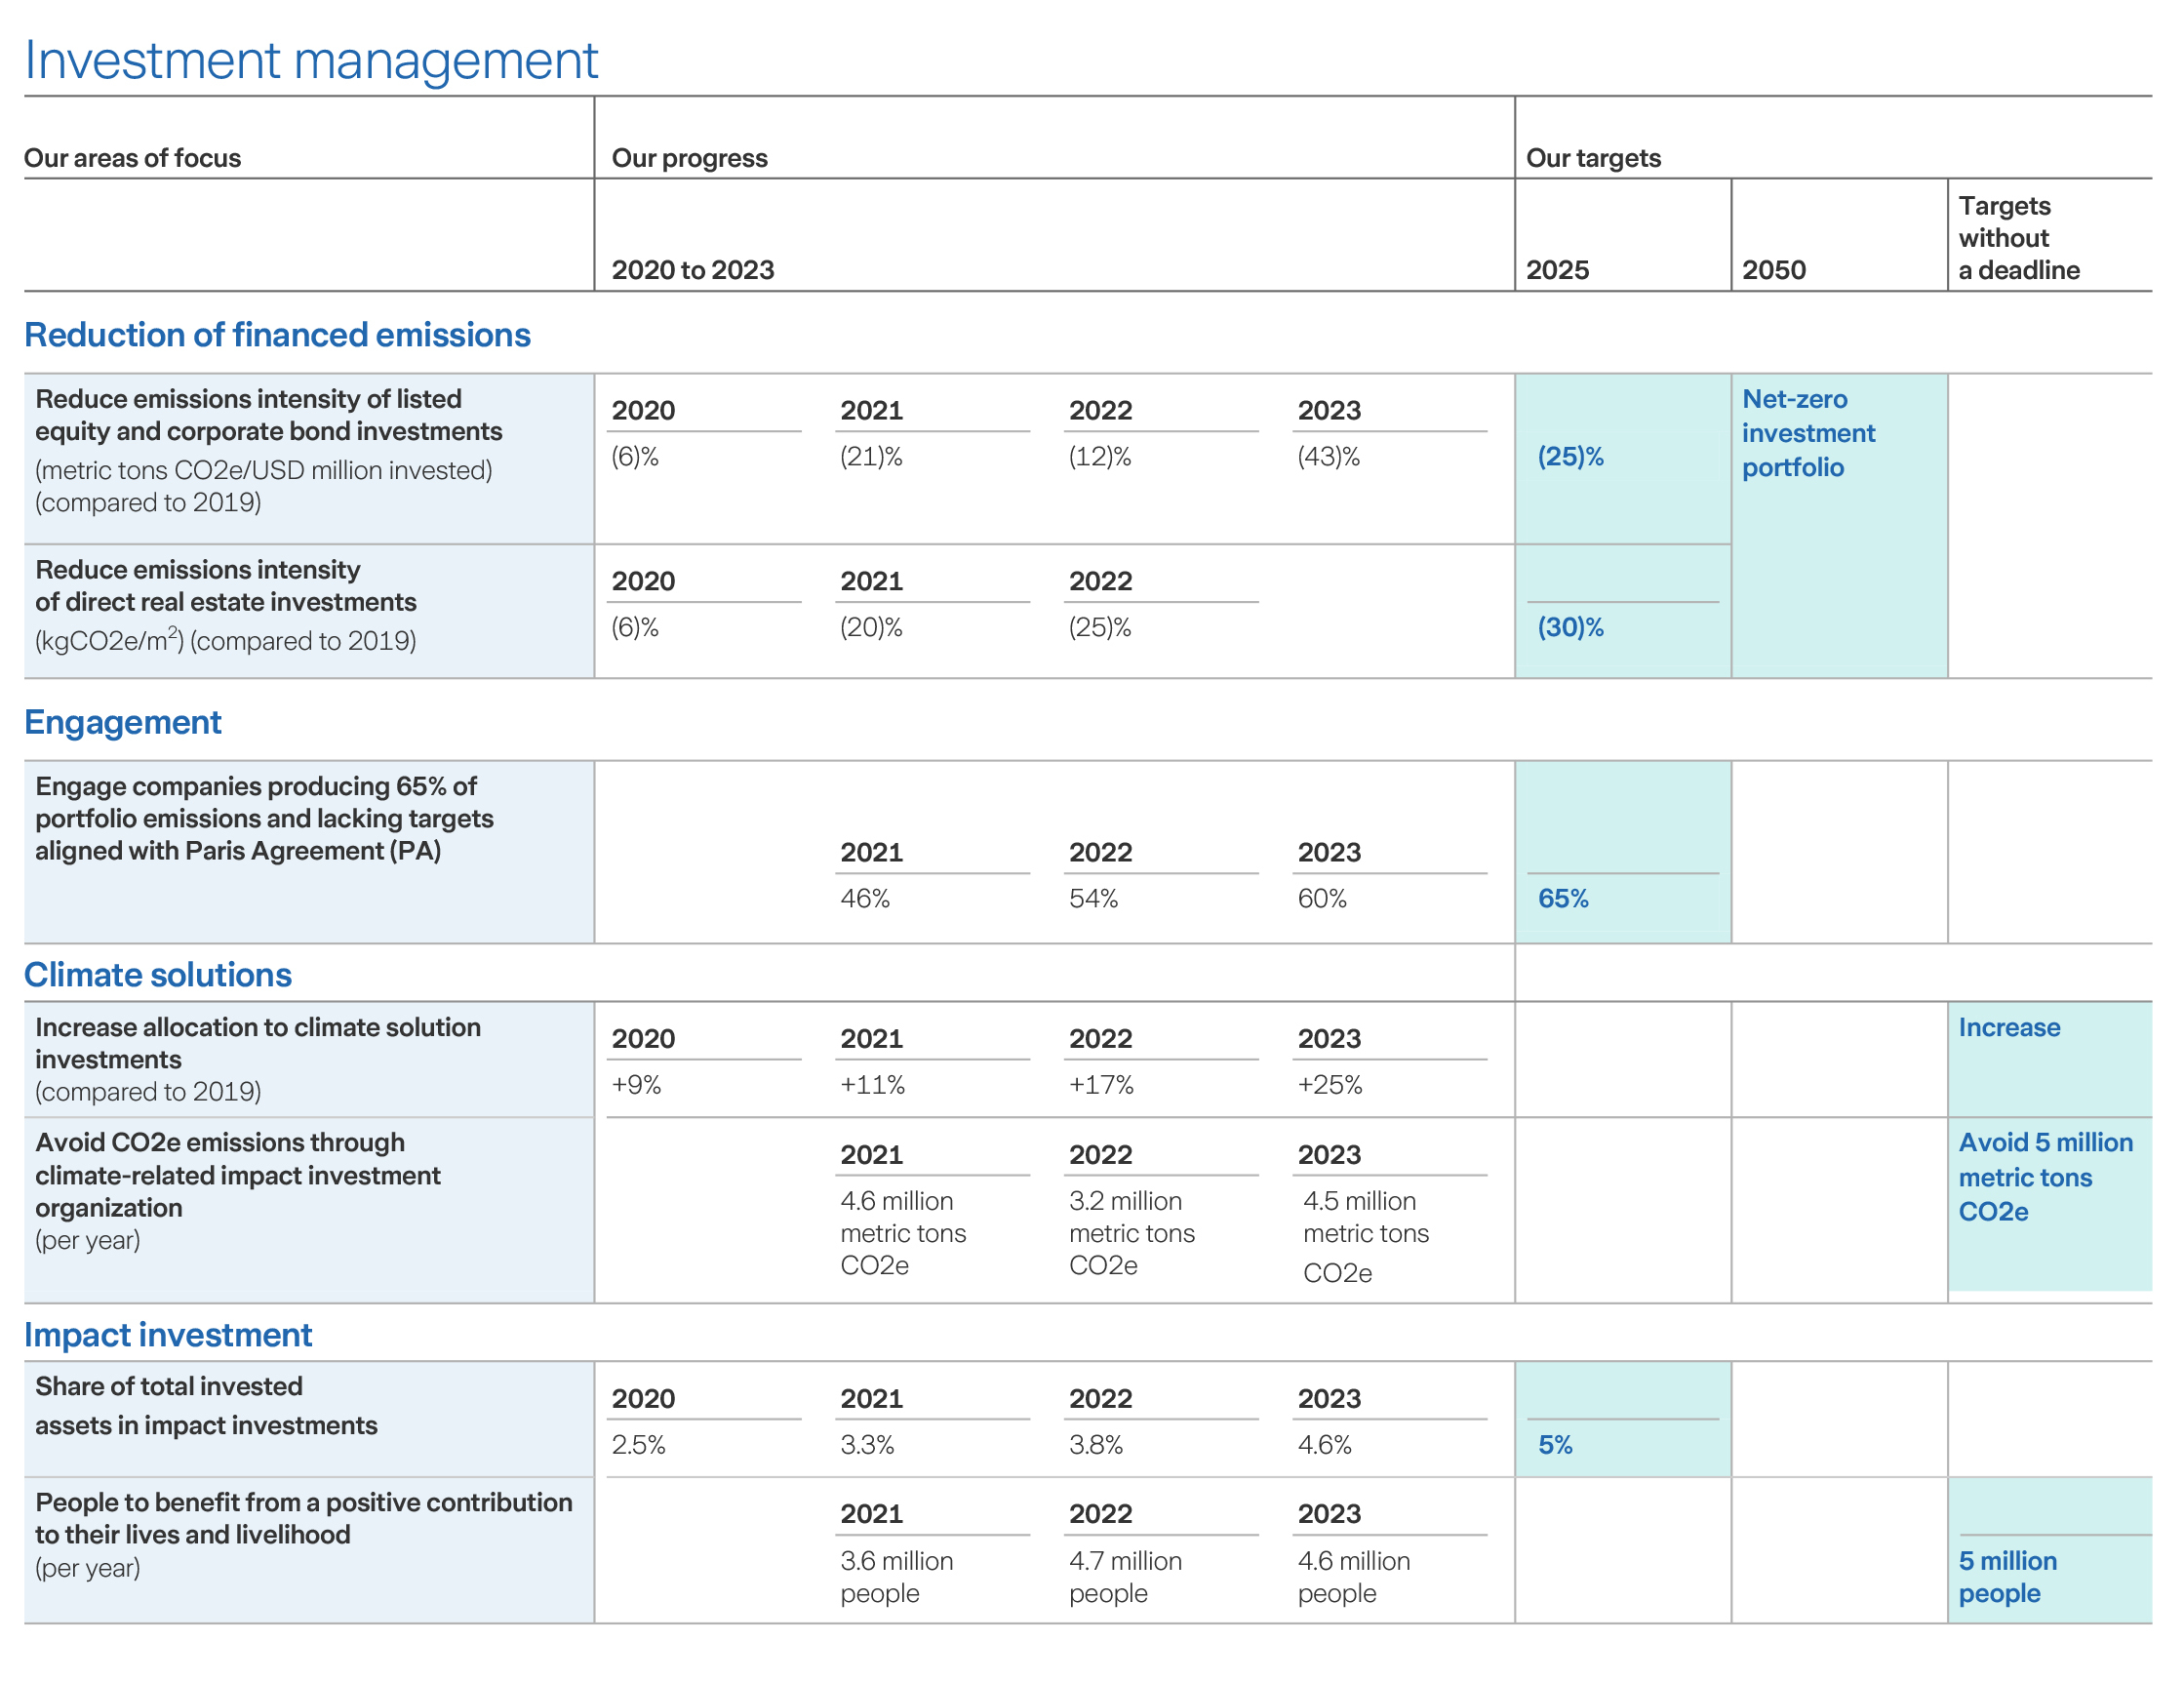 tables about investment management